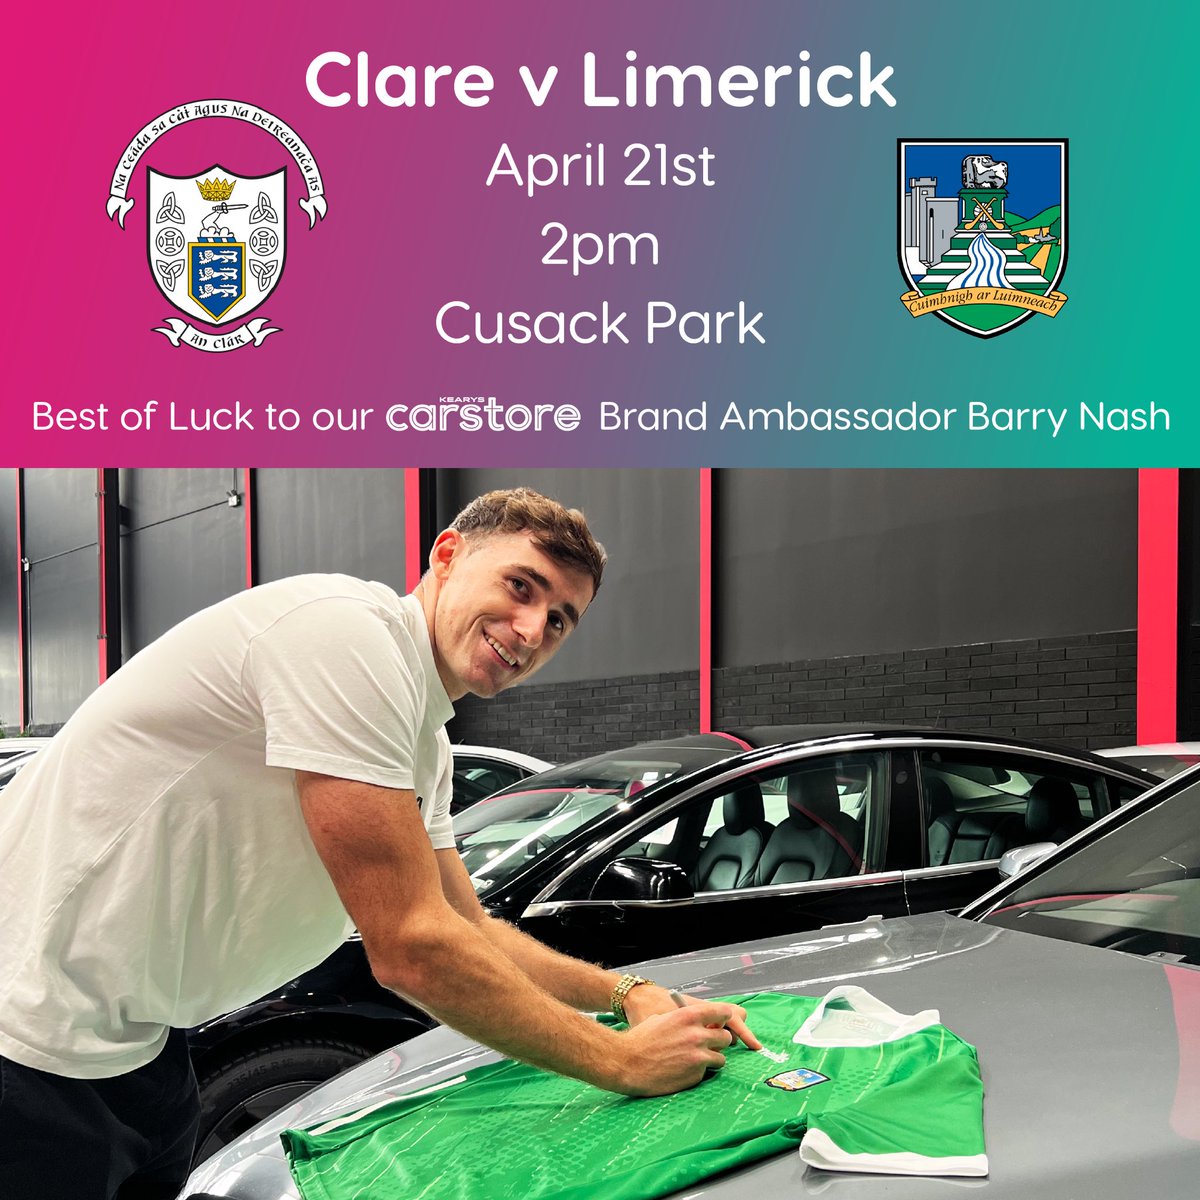 What a win for Carstore Limerick Brand Ambassador Barry Nash & Limerick hurling against Clare today! Some performance from Barry at #4!